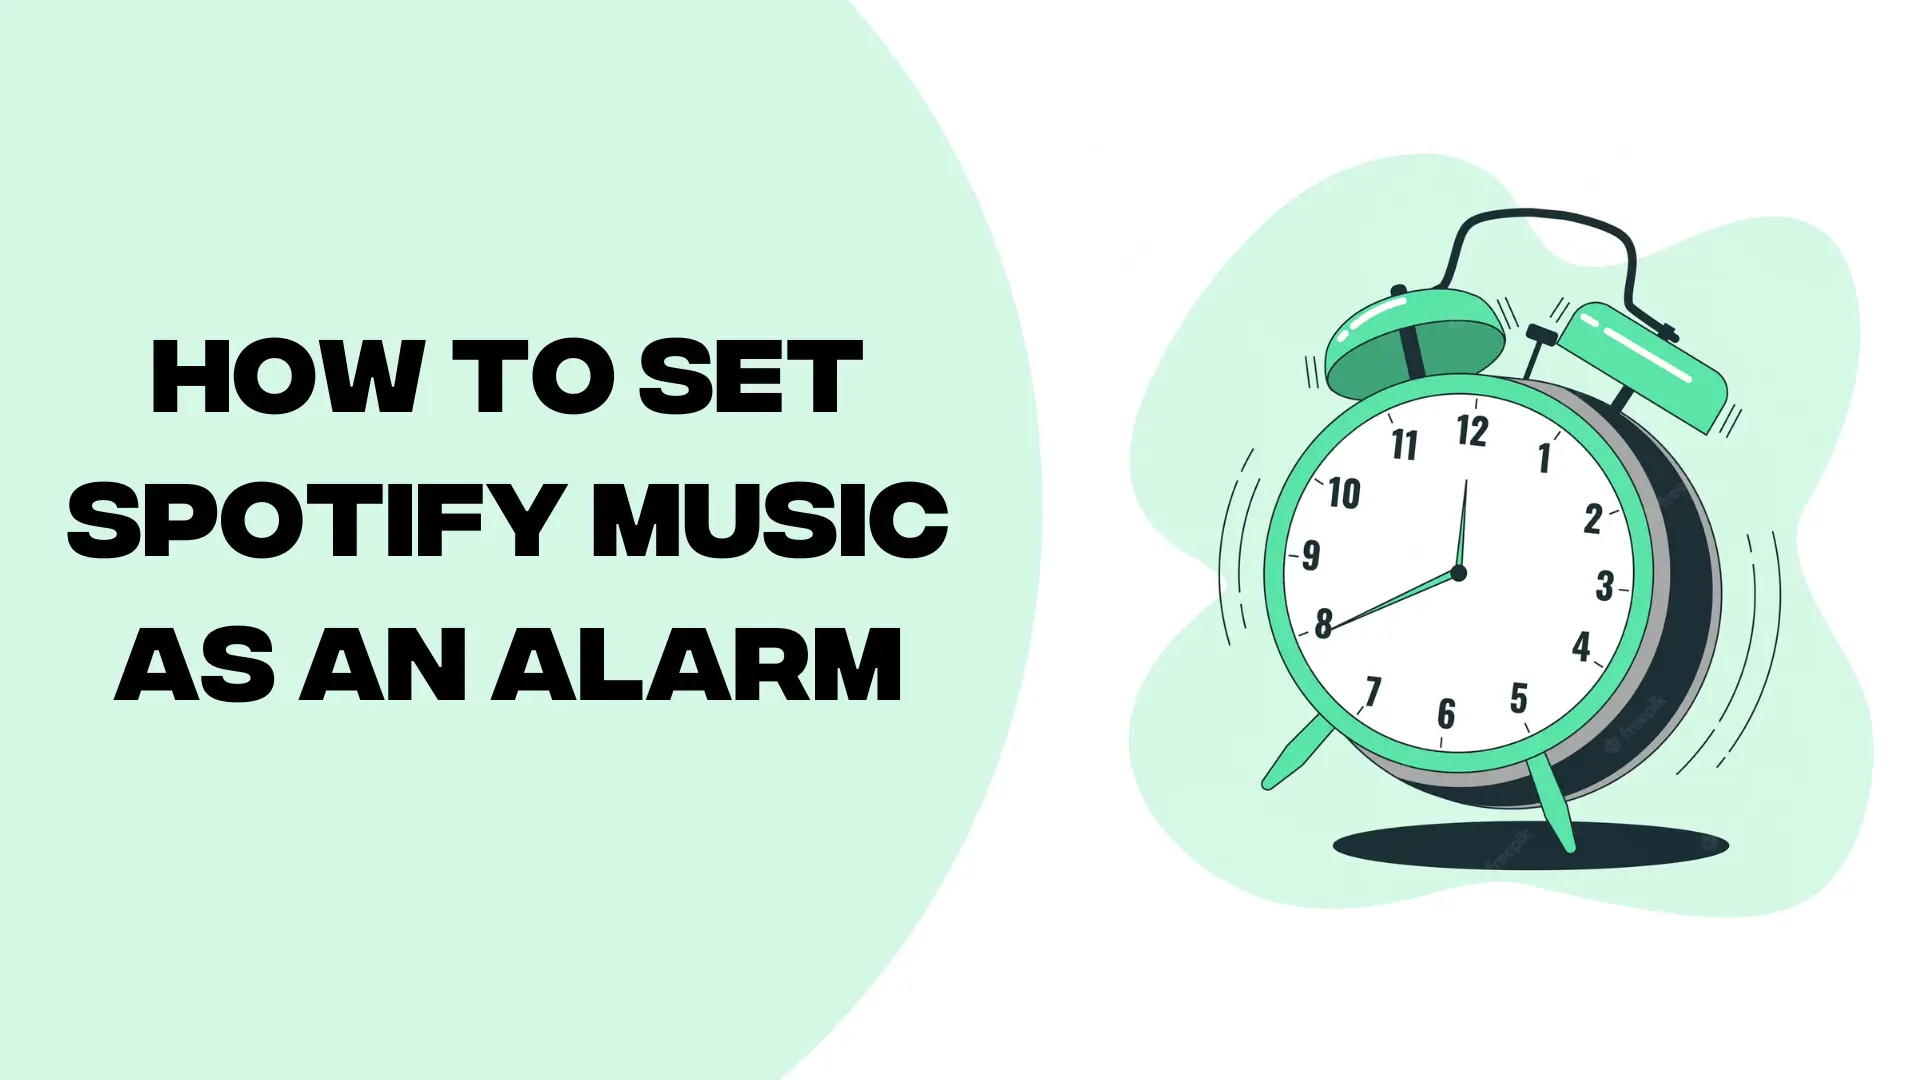 How to set Spotify music as an Alarm